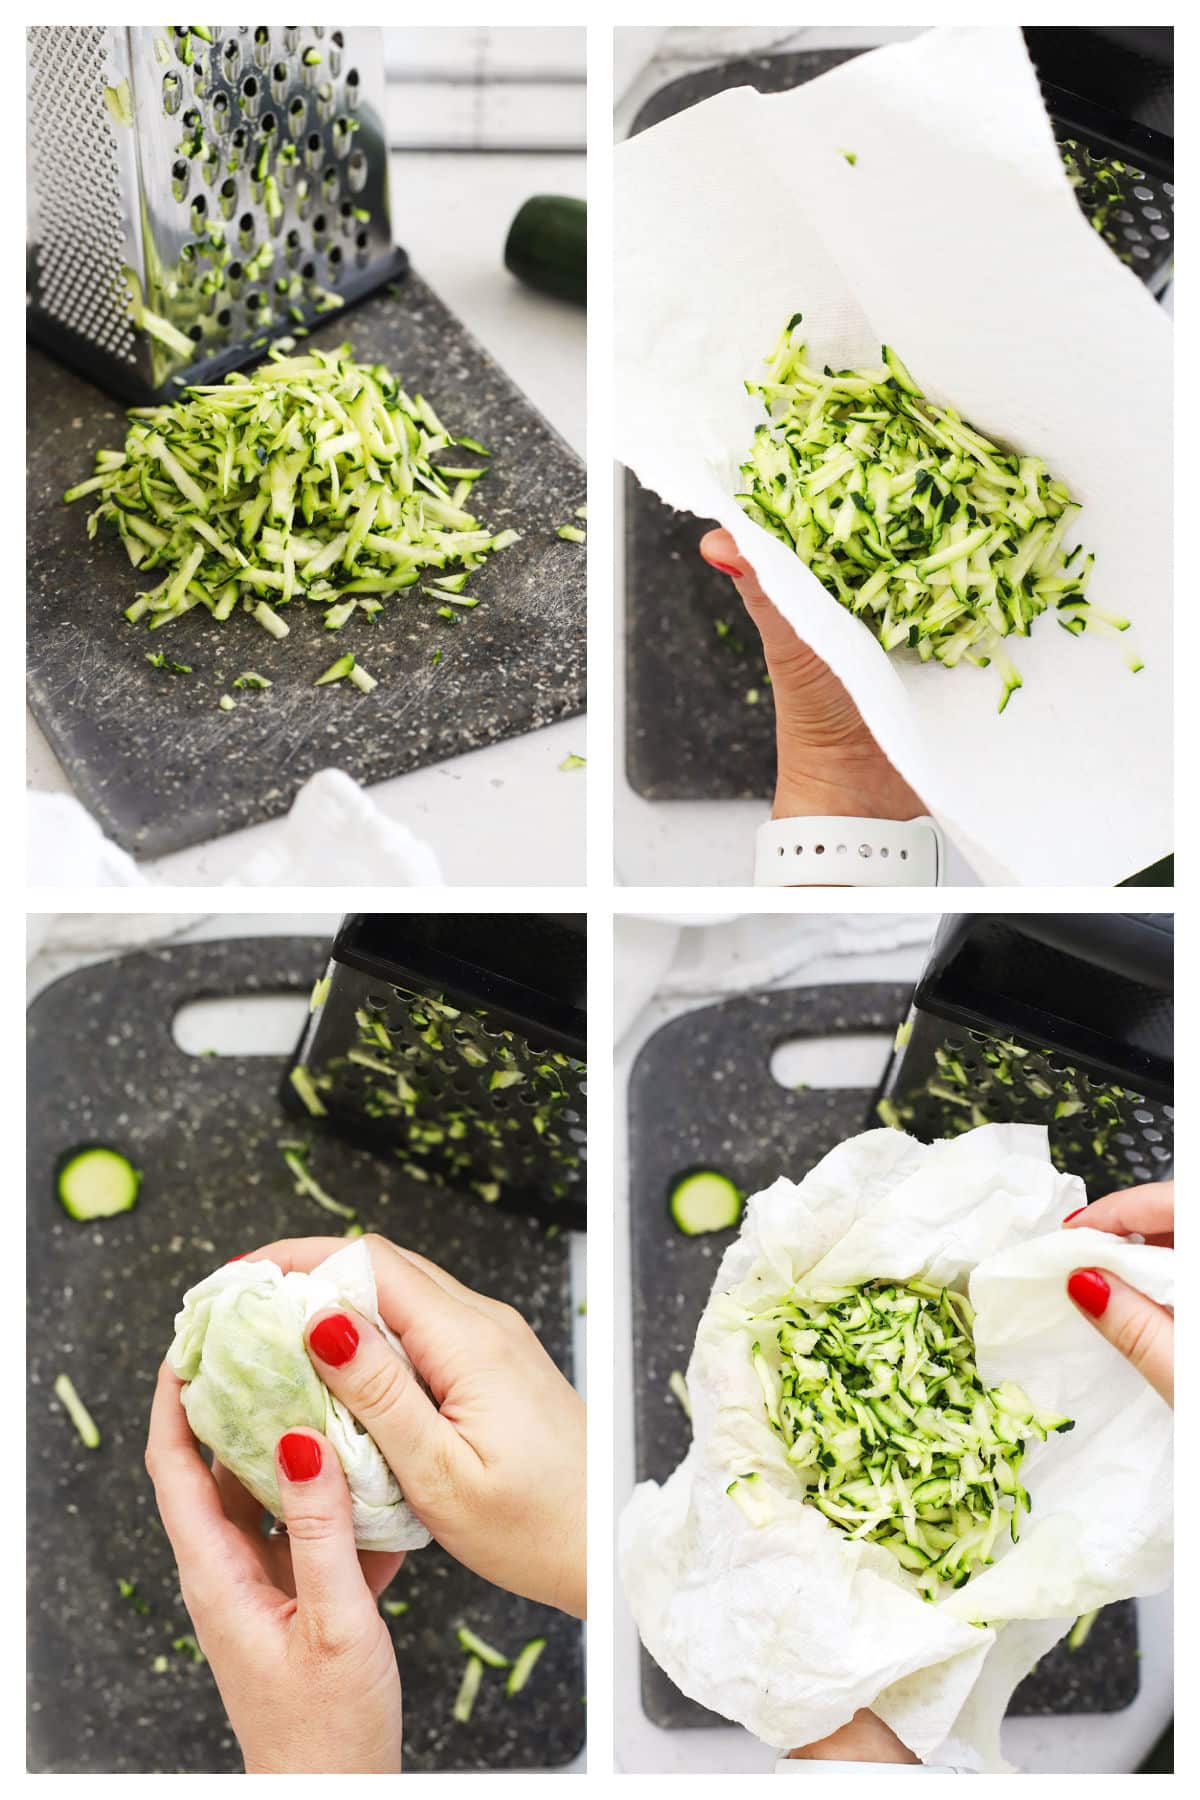 showing how to squeeze excess liquid from grated zucchini for baking